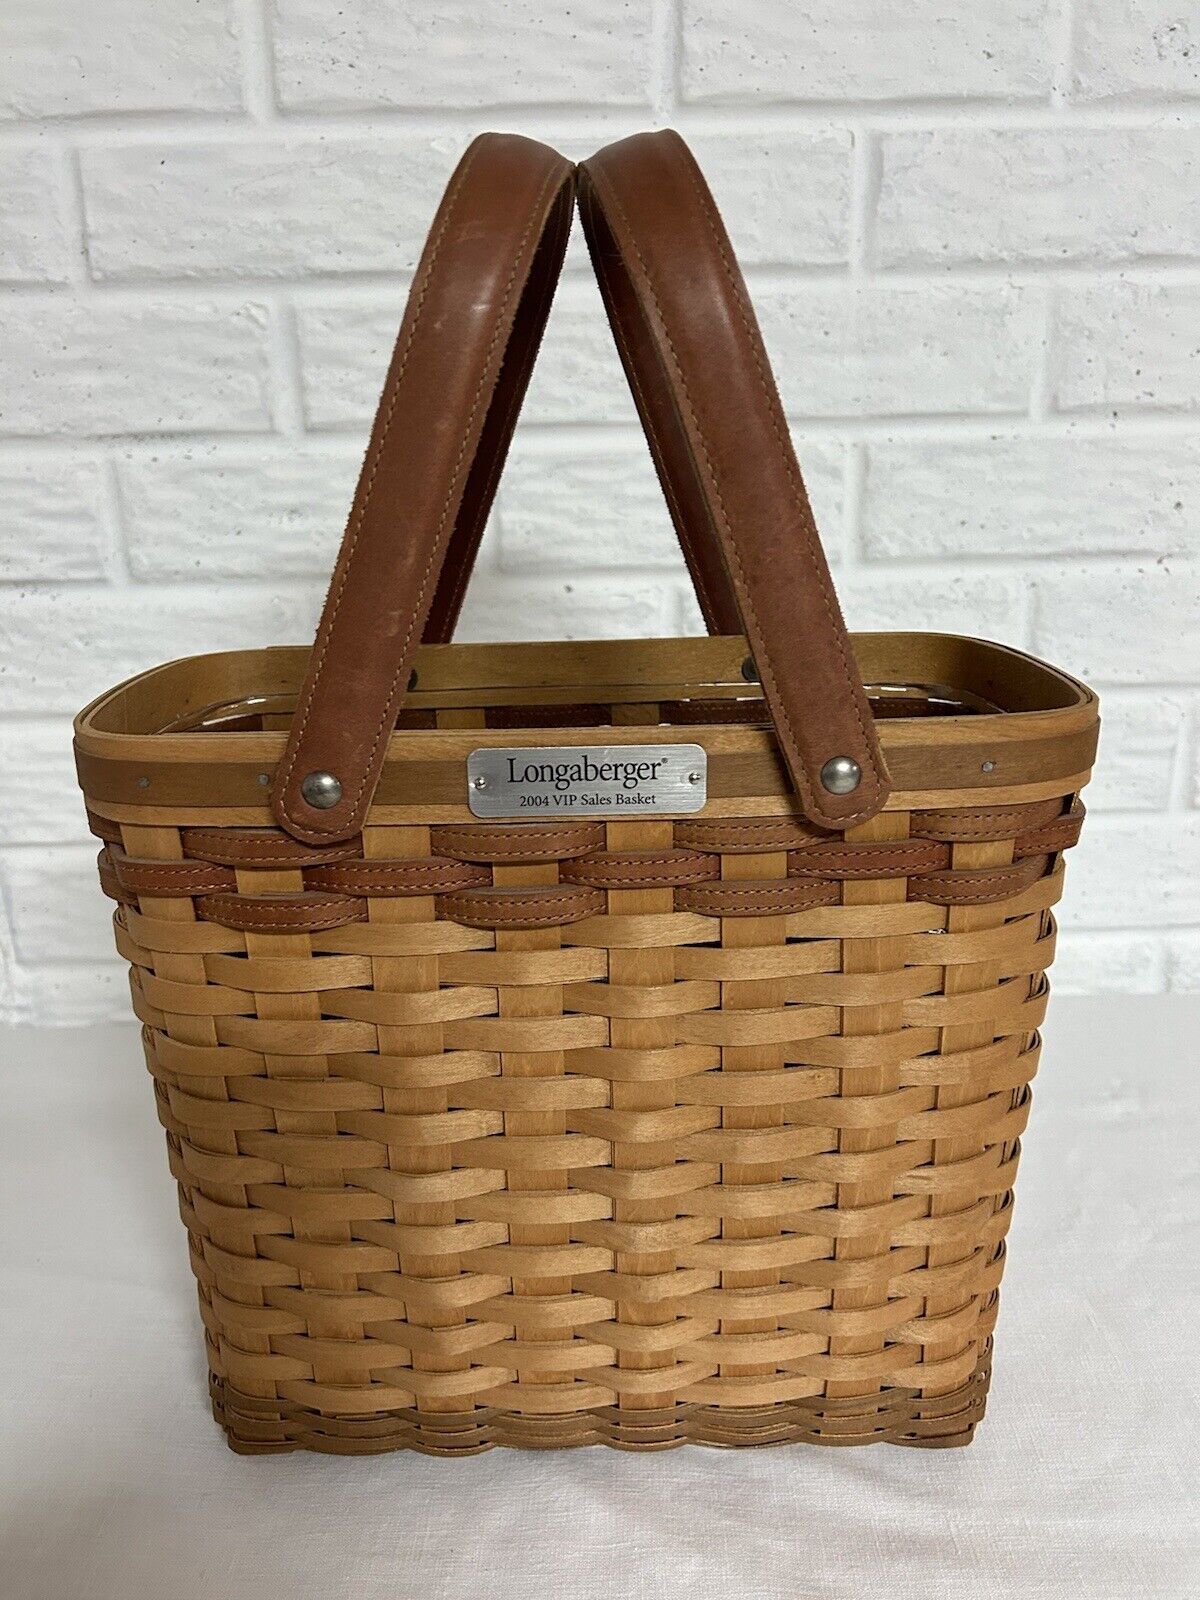 Longaberger 2004 VIP Basket RARE Consultant Only